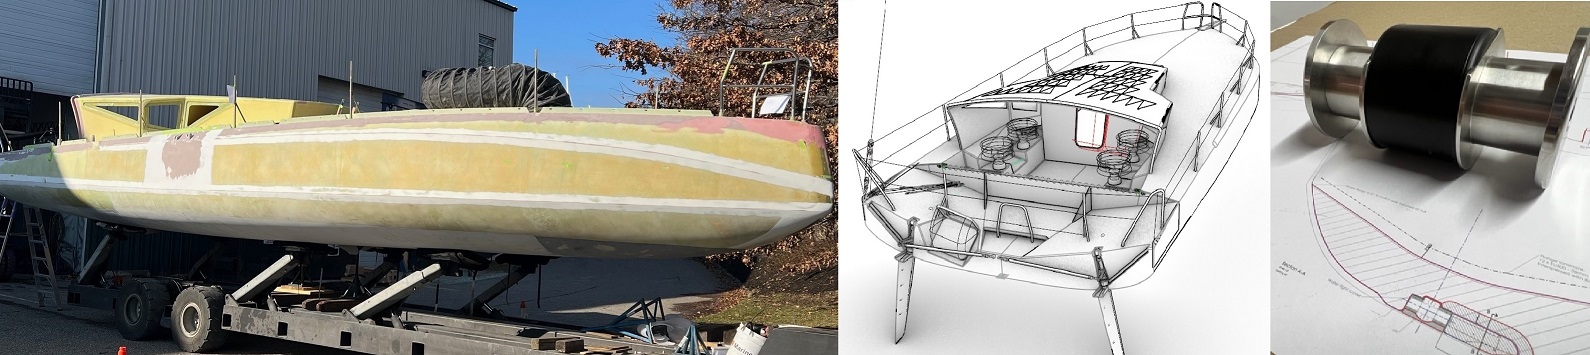 Images of Owen Clarke’s  latest Class 40 racing yacht design close to being ready for launch in the USA. This scow bow design for an American owner will launch in April. Also shown images of the twin rudder arrangement on the stern and a composite engineering chainplate design detail.